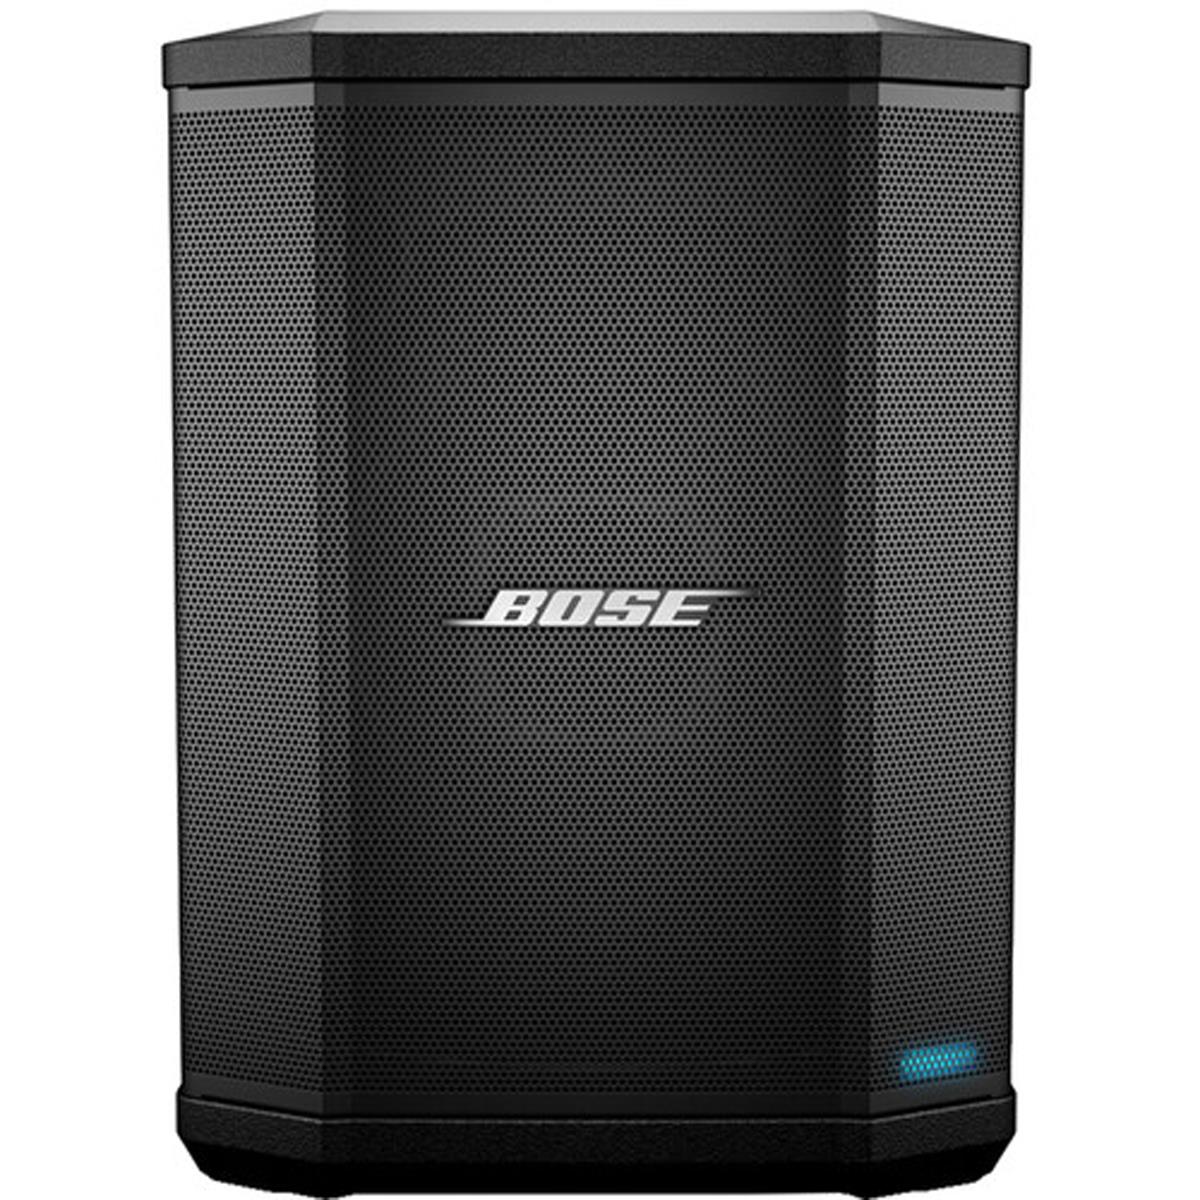 Bose S1 Pro All-In-One Portable Bluetooth Speaker, No Battery -  787930-1110